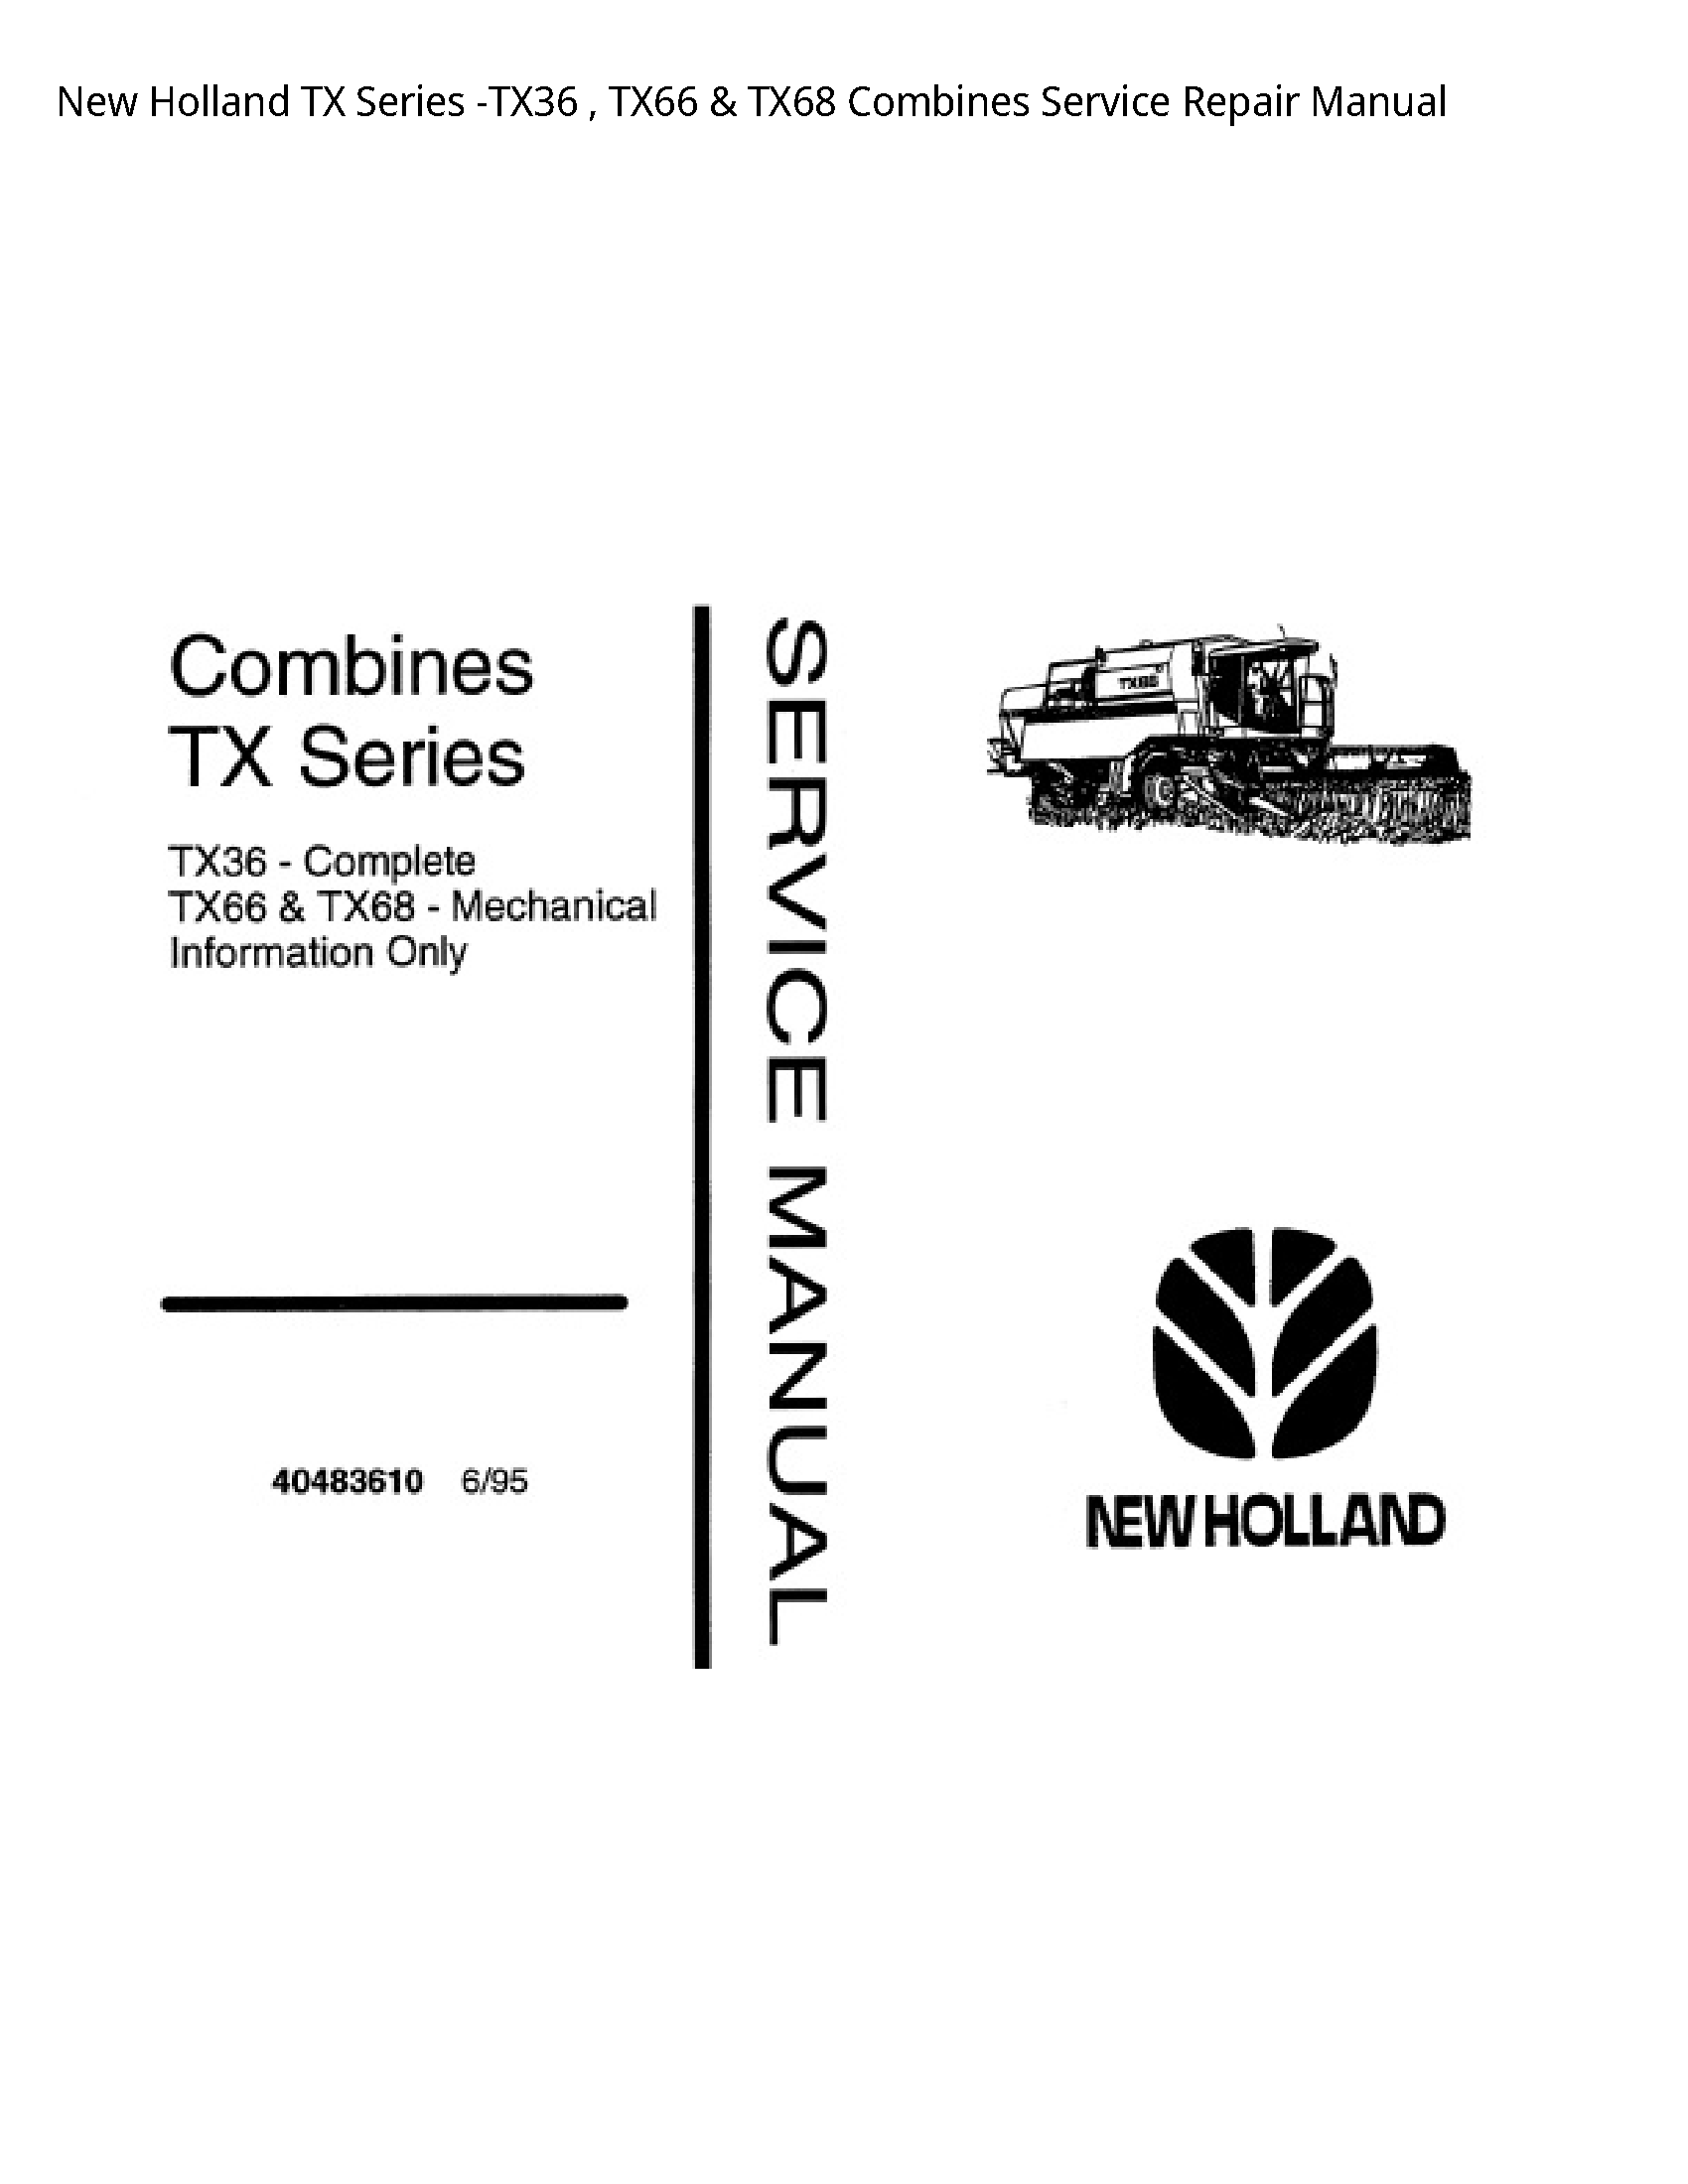 New Holland -TX36 TX Series Combines manual